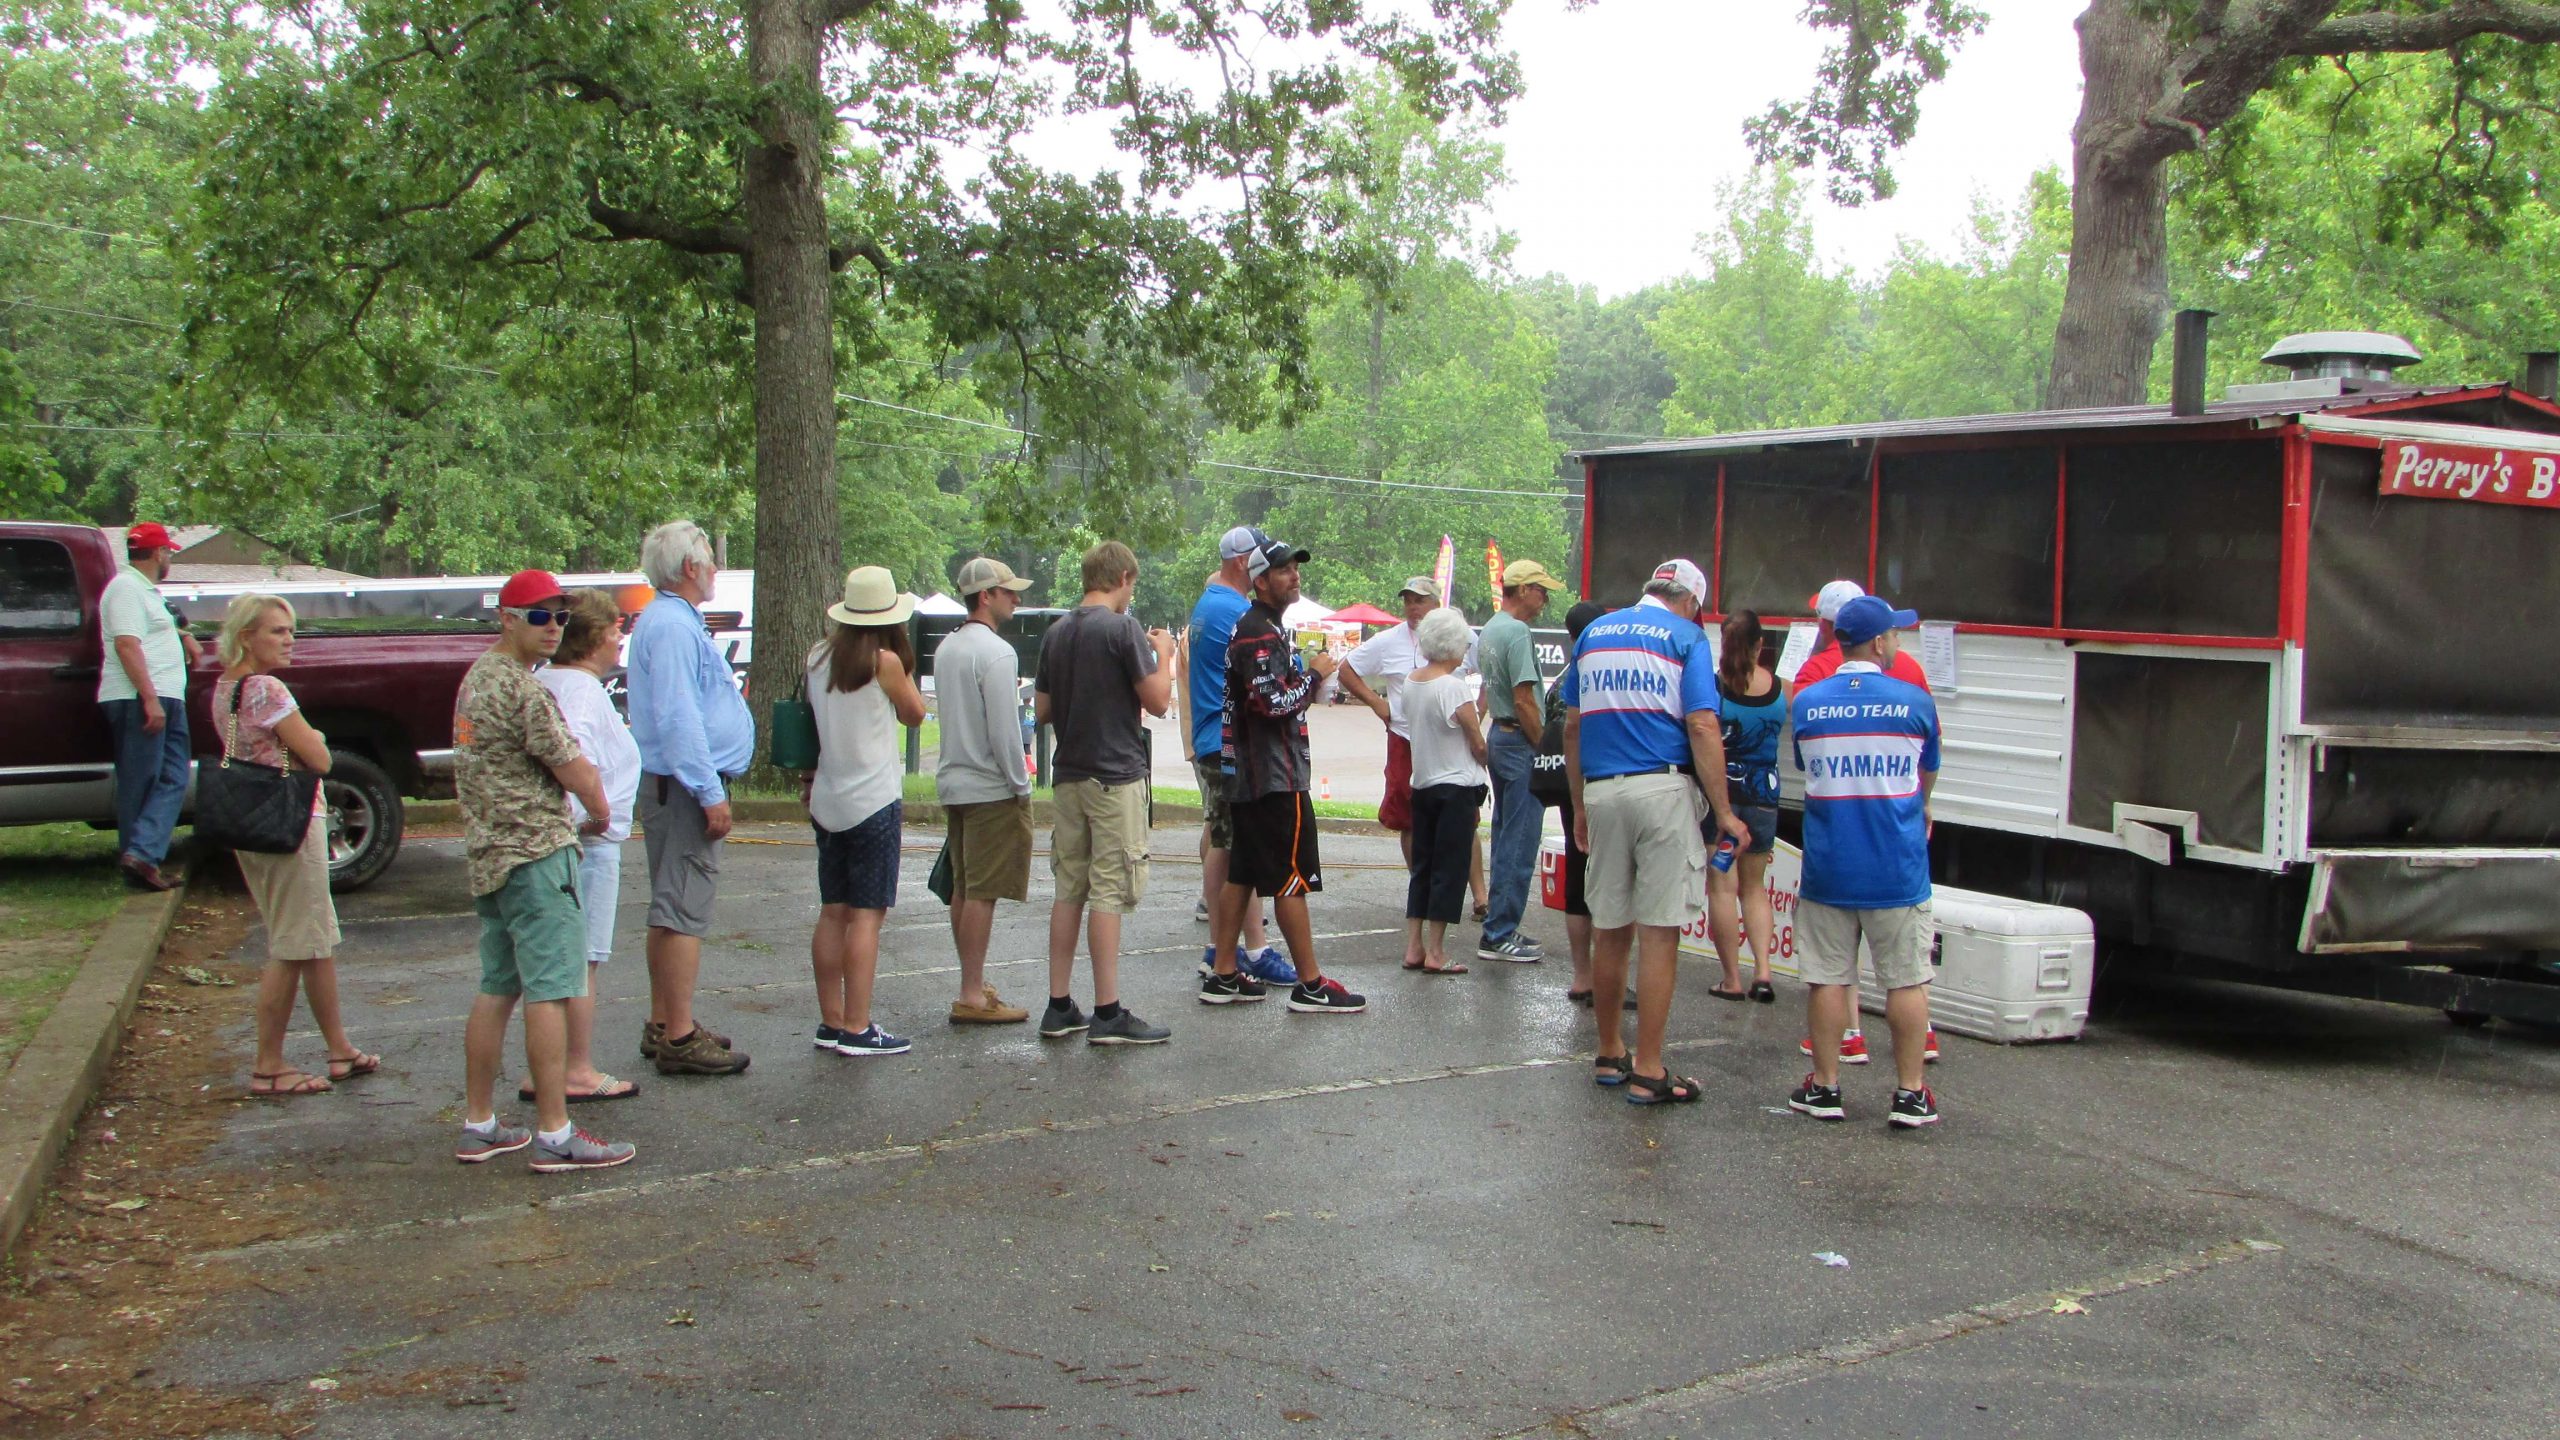 BASSfest fans line up for some local barbecue.